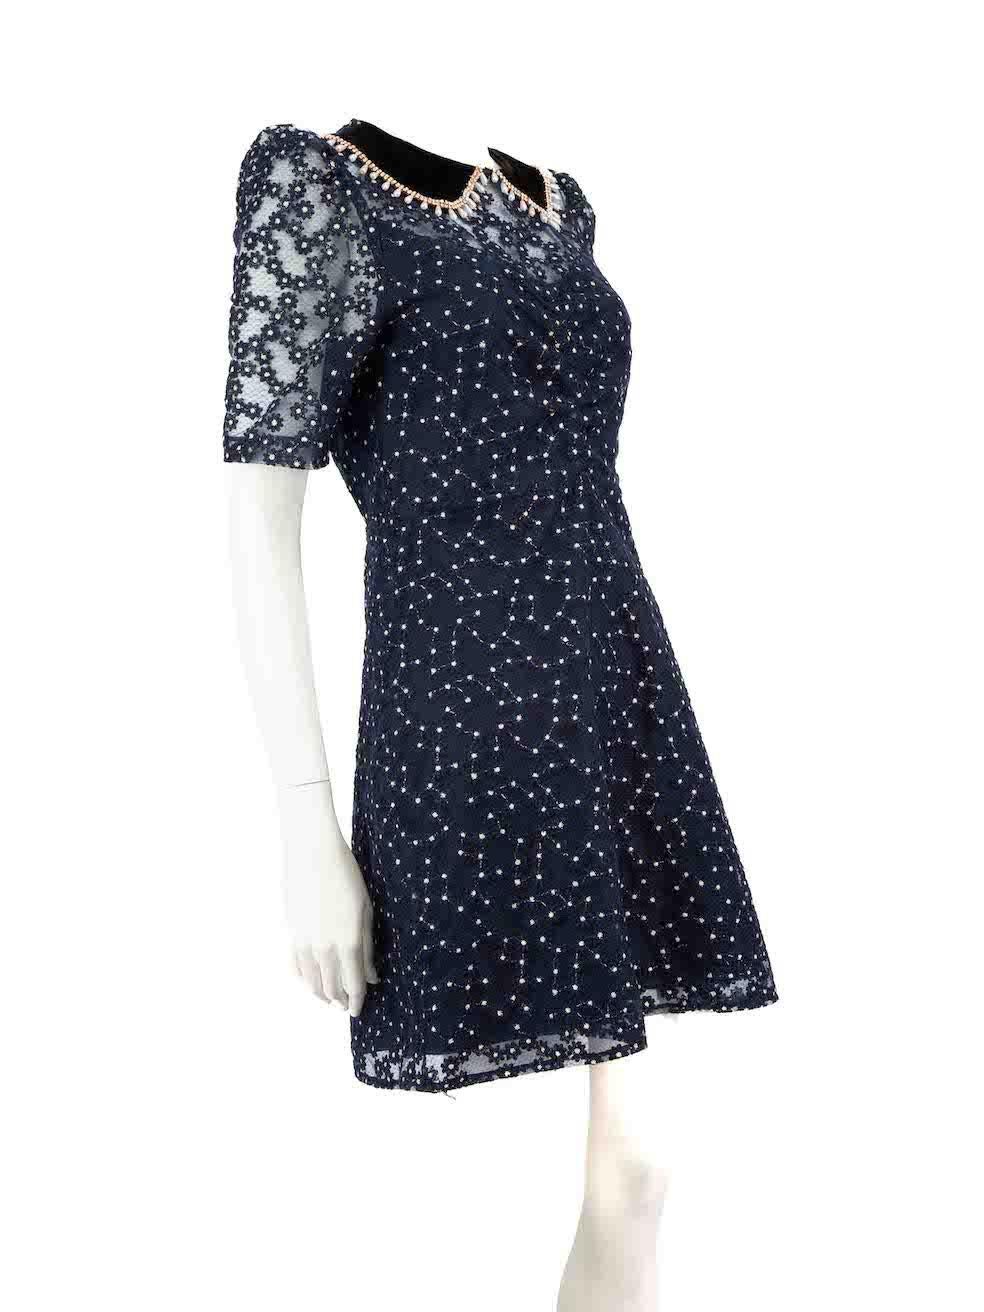 CONDITION is Very good. Hardly any visible wear to dress is evident on this used Sandro designer resale item.
 
 Details
 Navy
 Polyester
 Knee length dress
 Floral embroidered accent
 Crystal detail collar
 Round neckline
 Sheer short sleeves
 Back